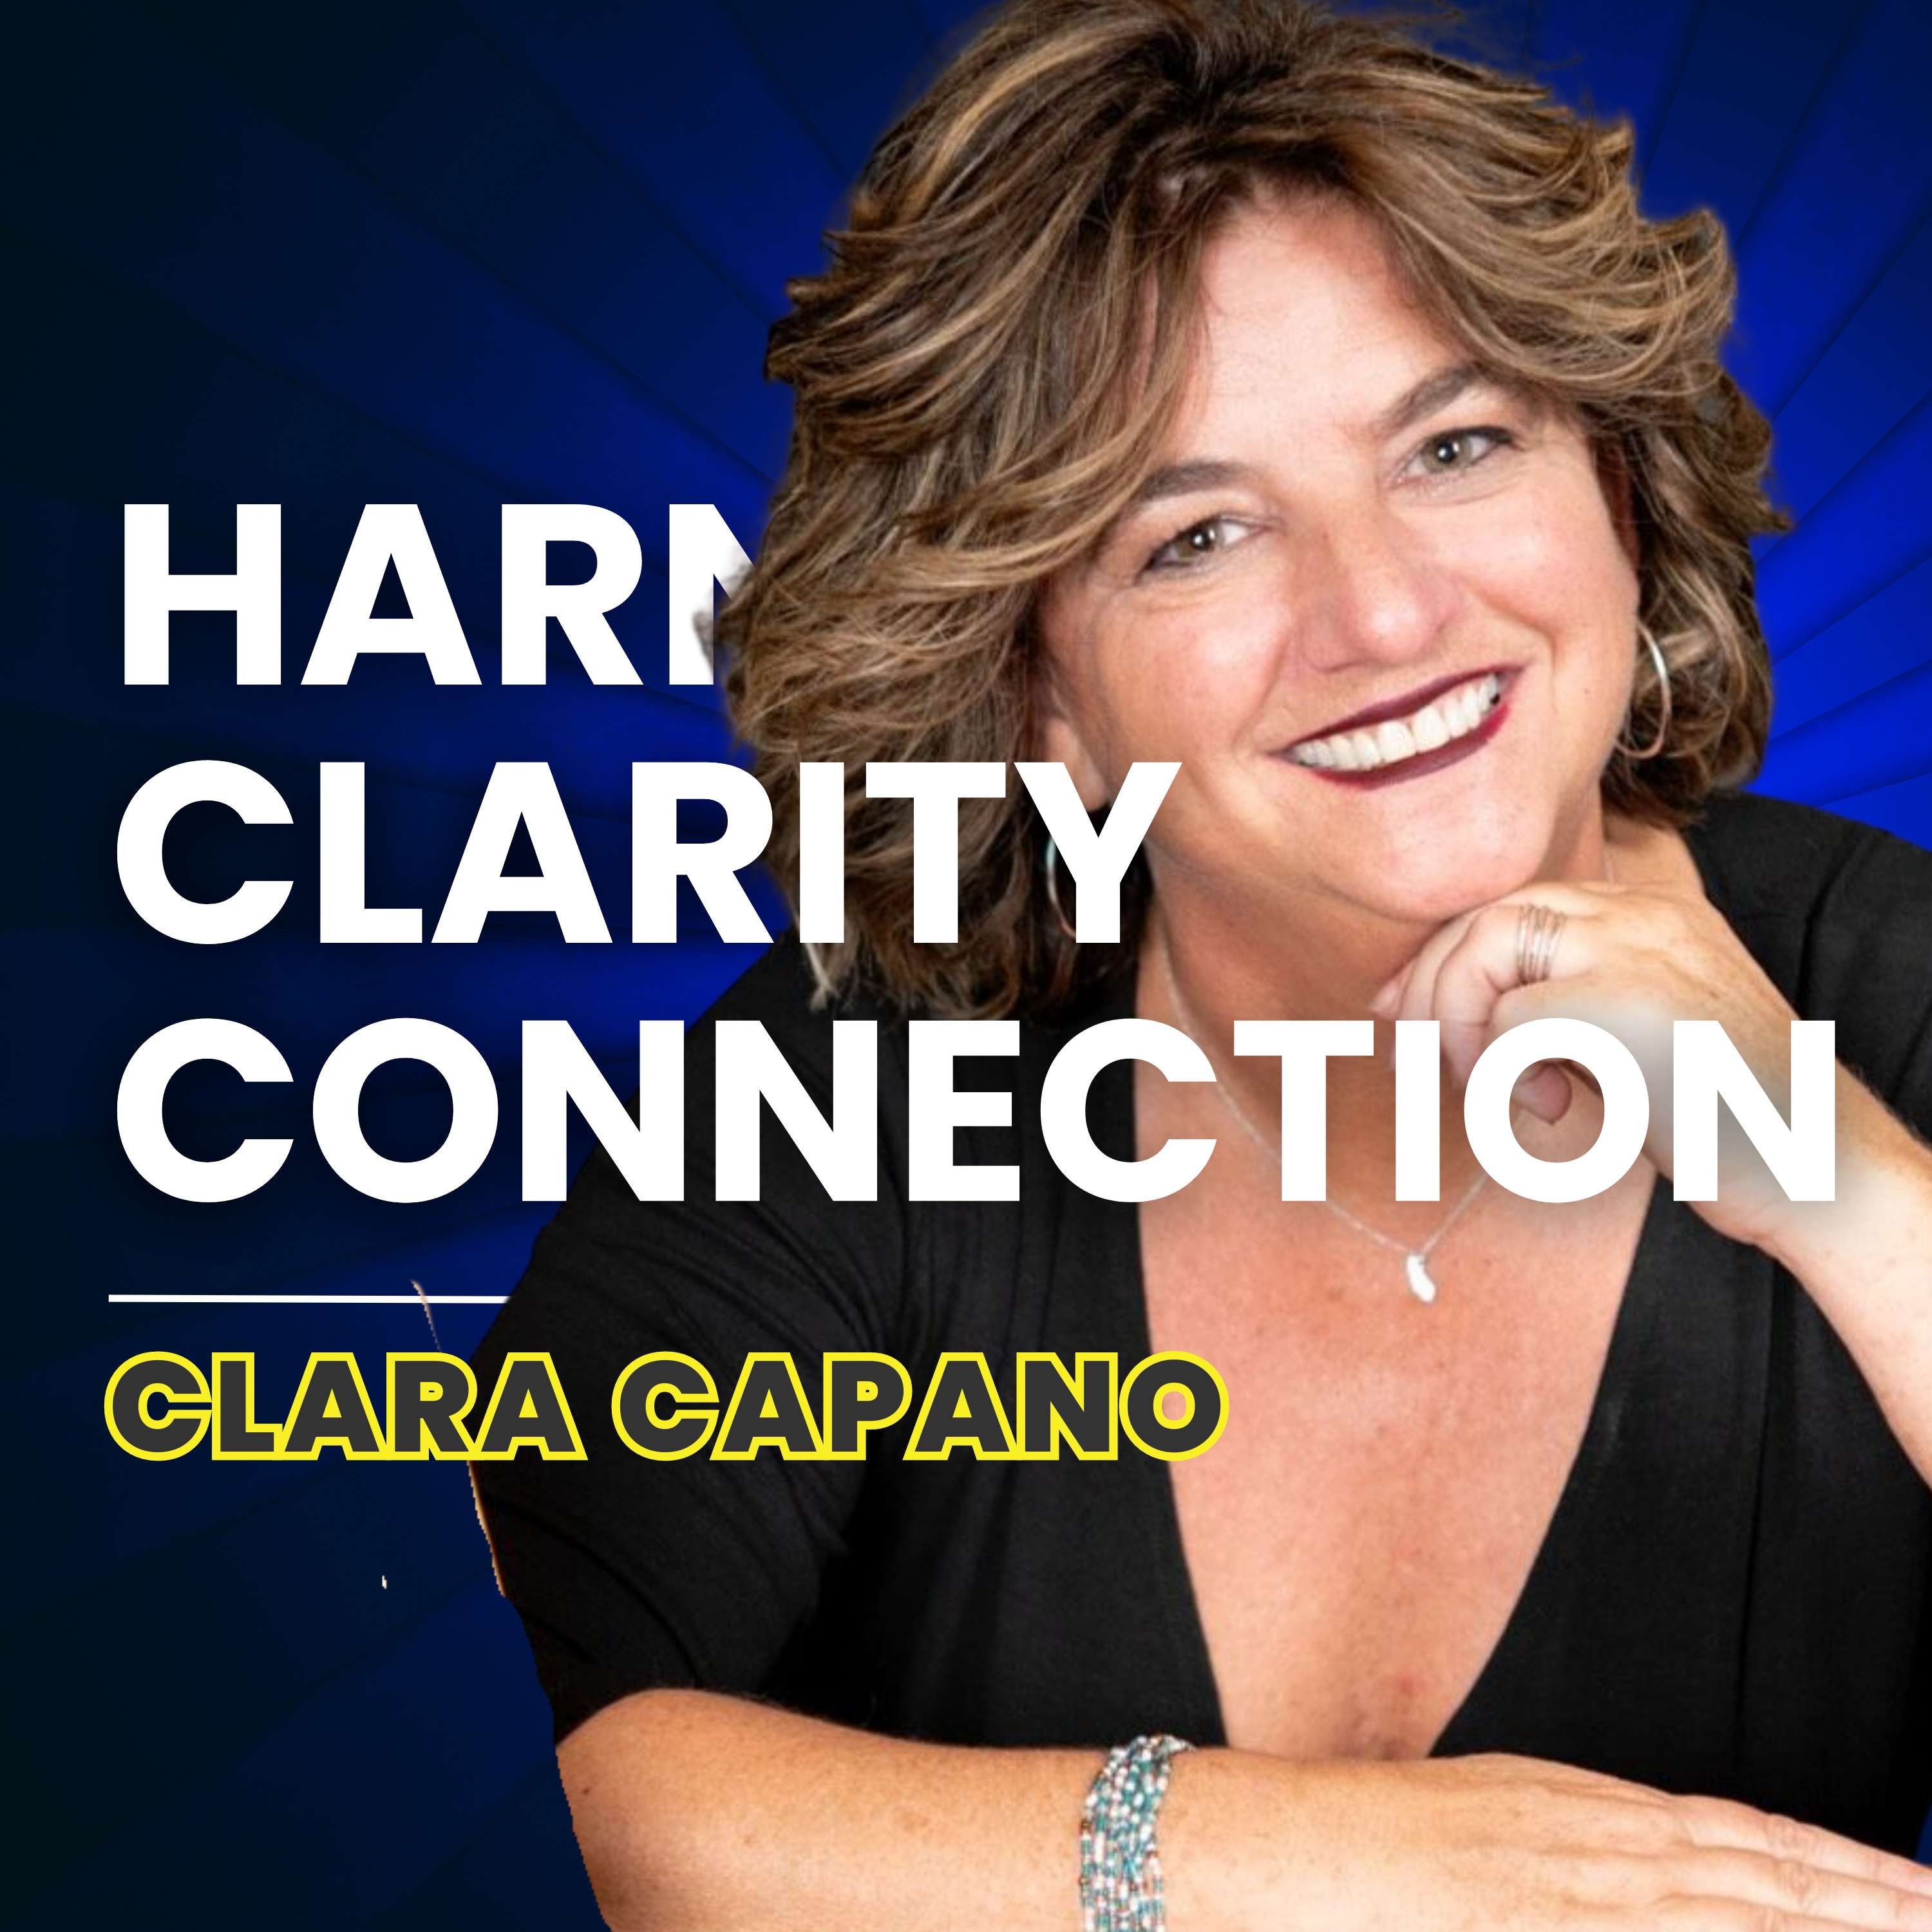 Clarity and Connection Through Intentional Living | Clara Capano